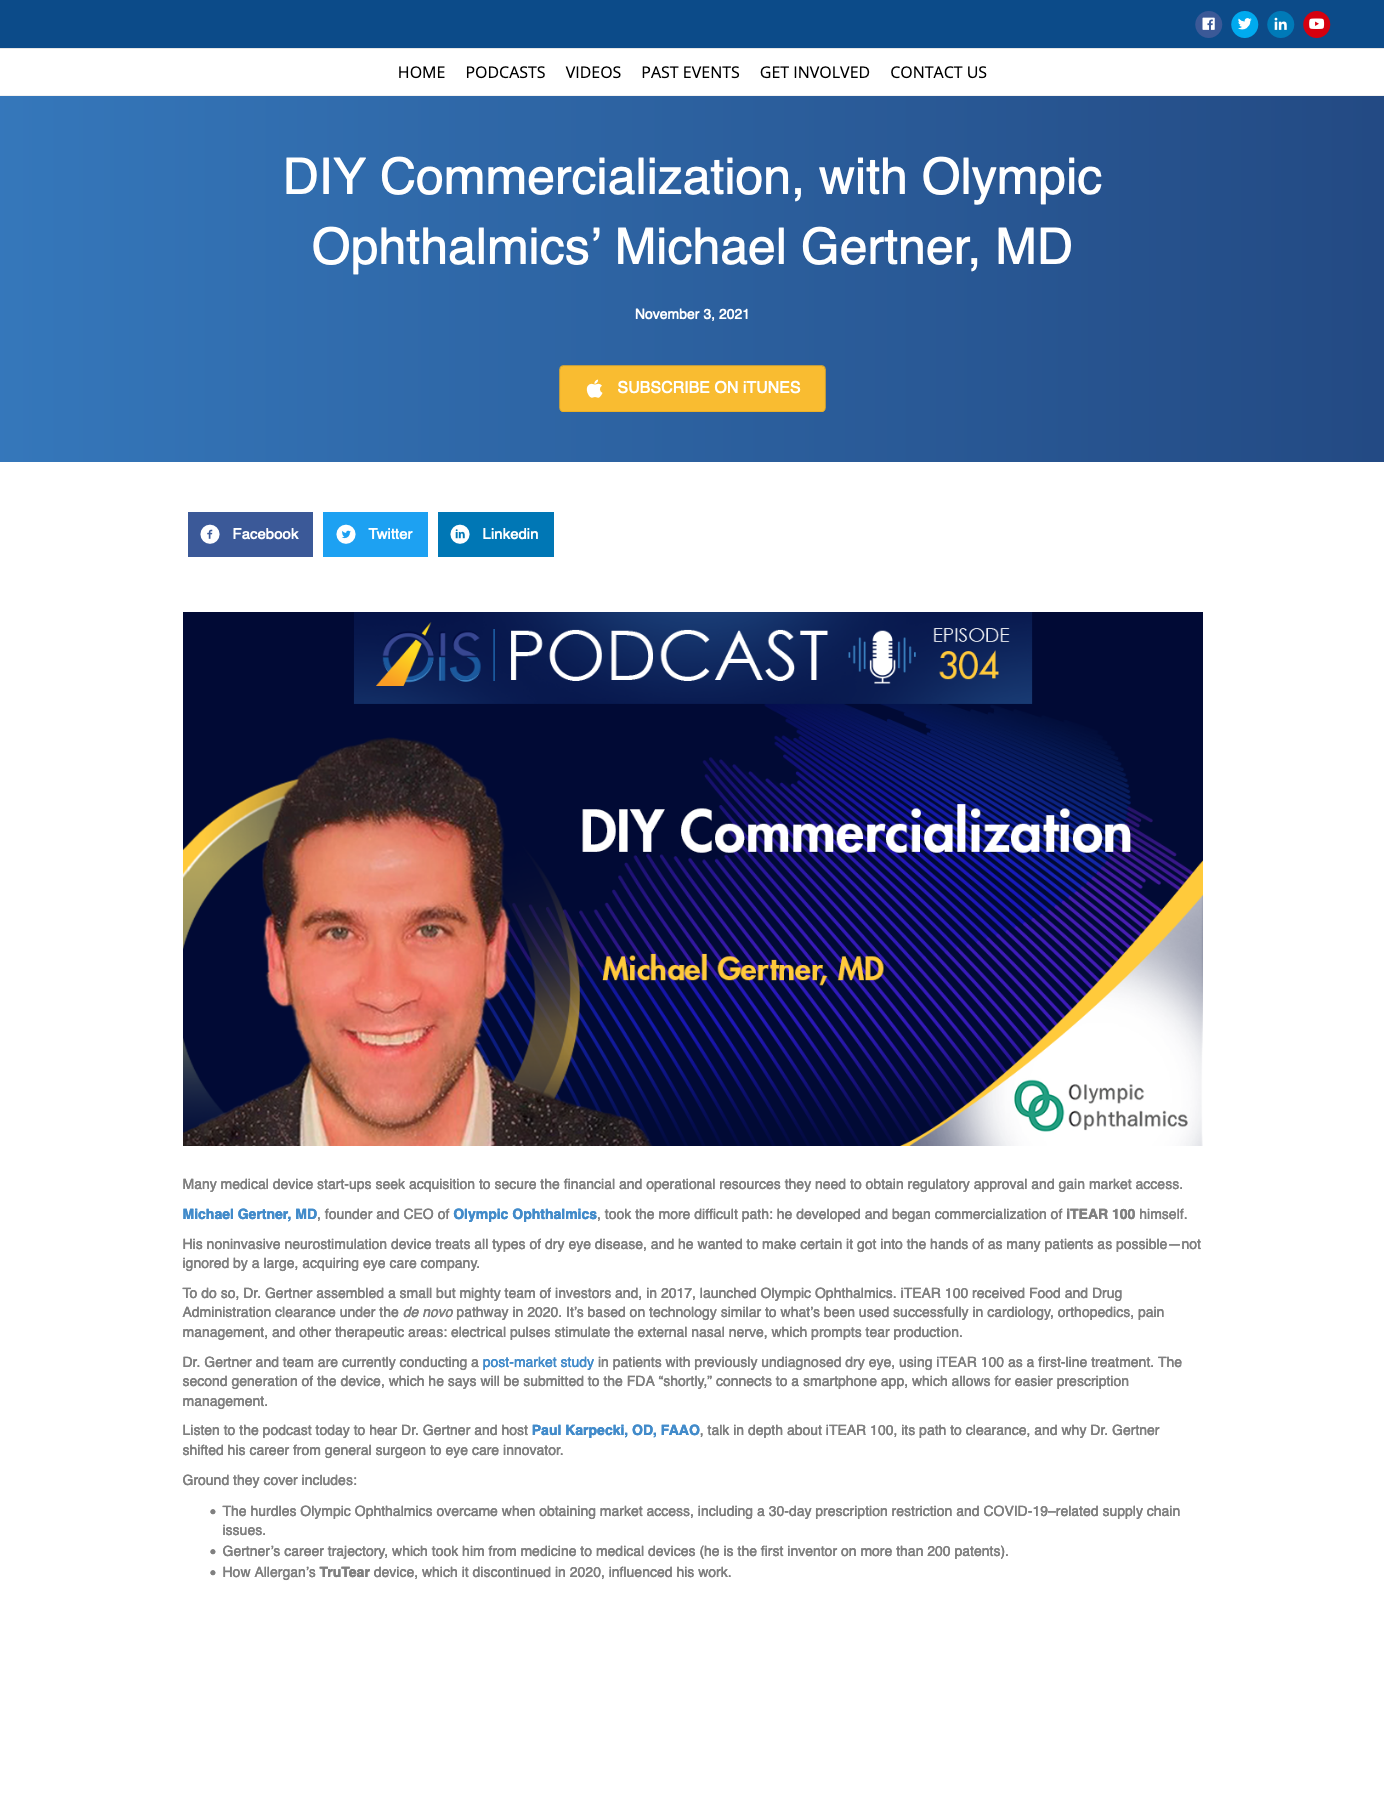 1-DIY-Commercialization-with-Olympic-Ophthalmics-Michael-Gertner-MD-nov3-2021